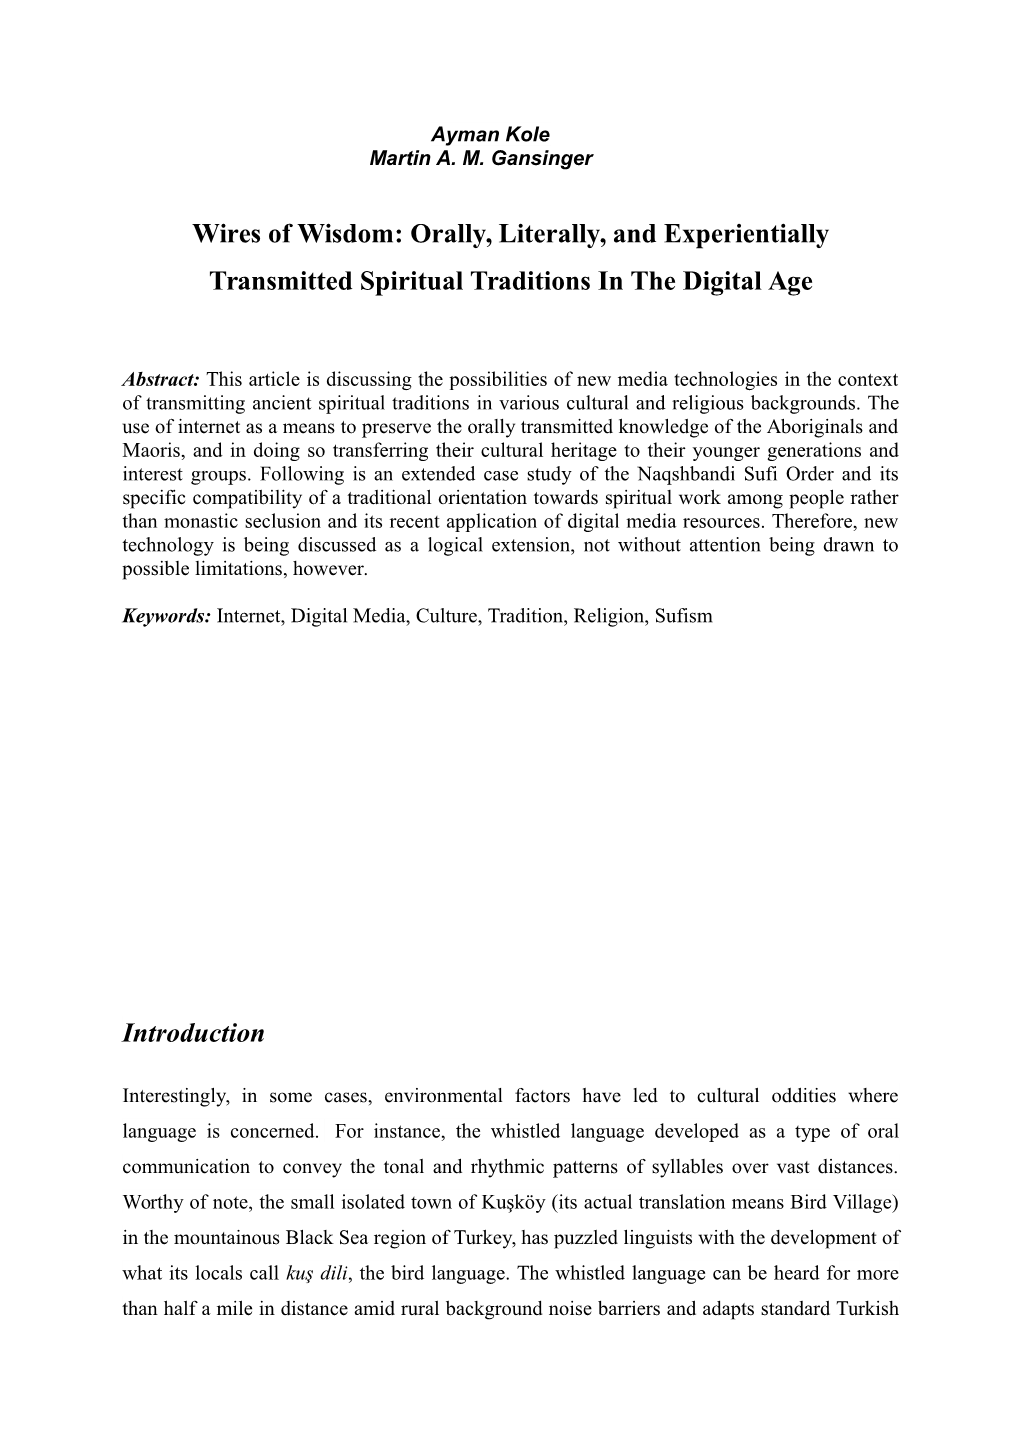 Wires of Wisdom: Orally, Literally, and Experientially Transmitted Spiritual Traditions in the Digital Age